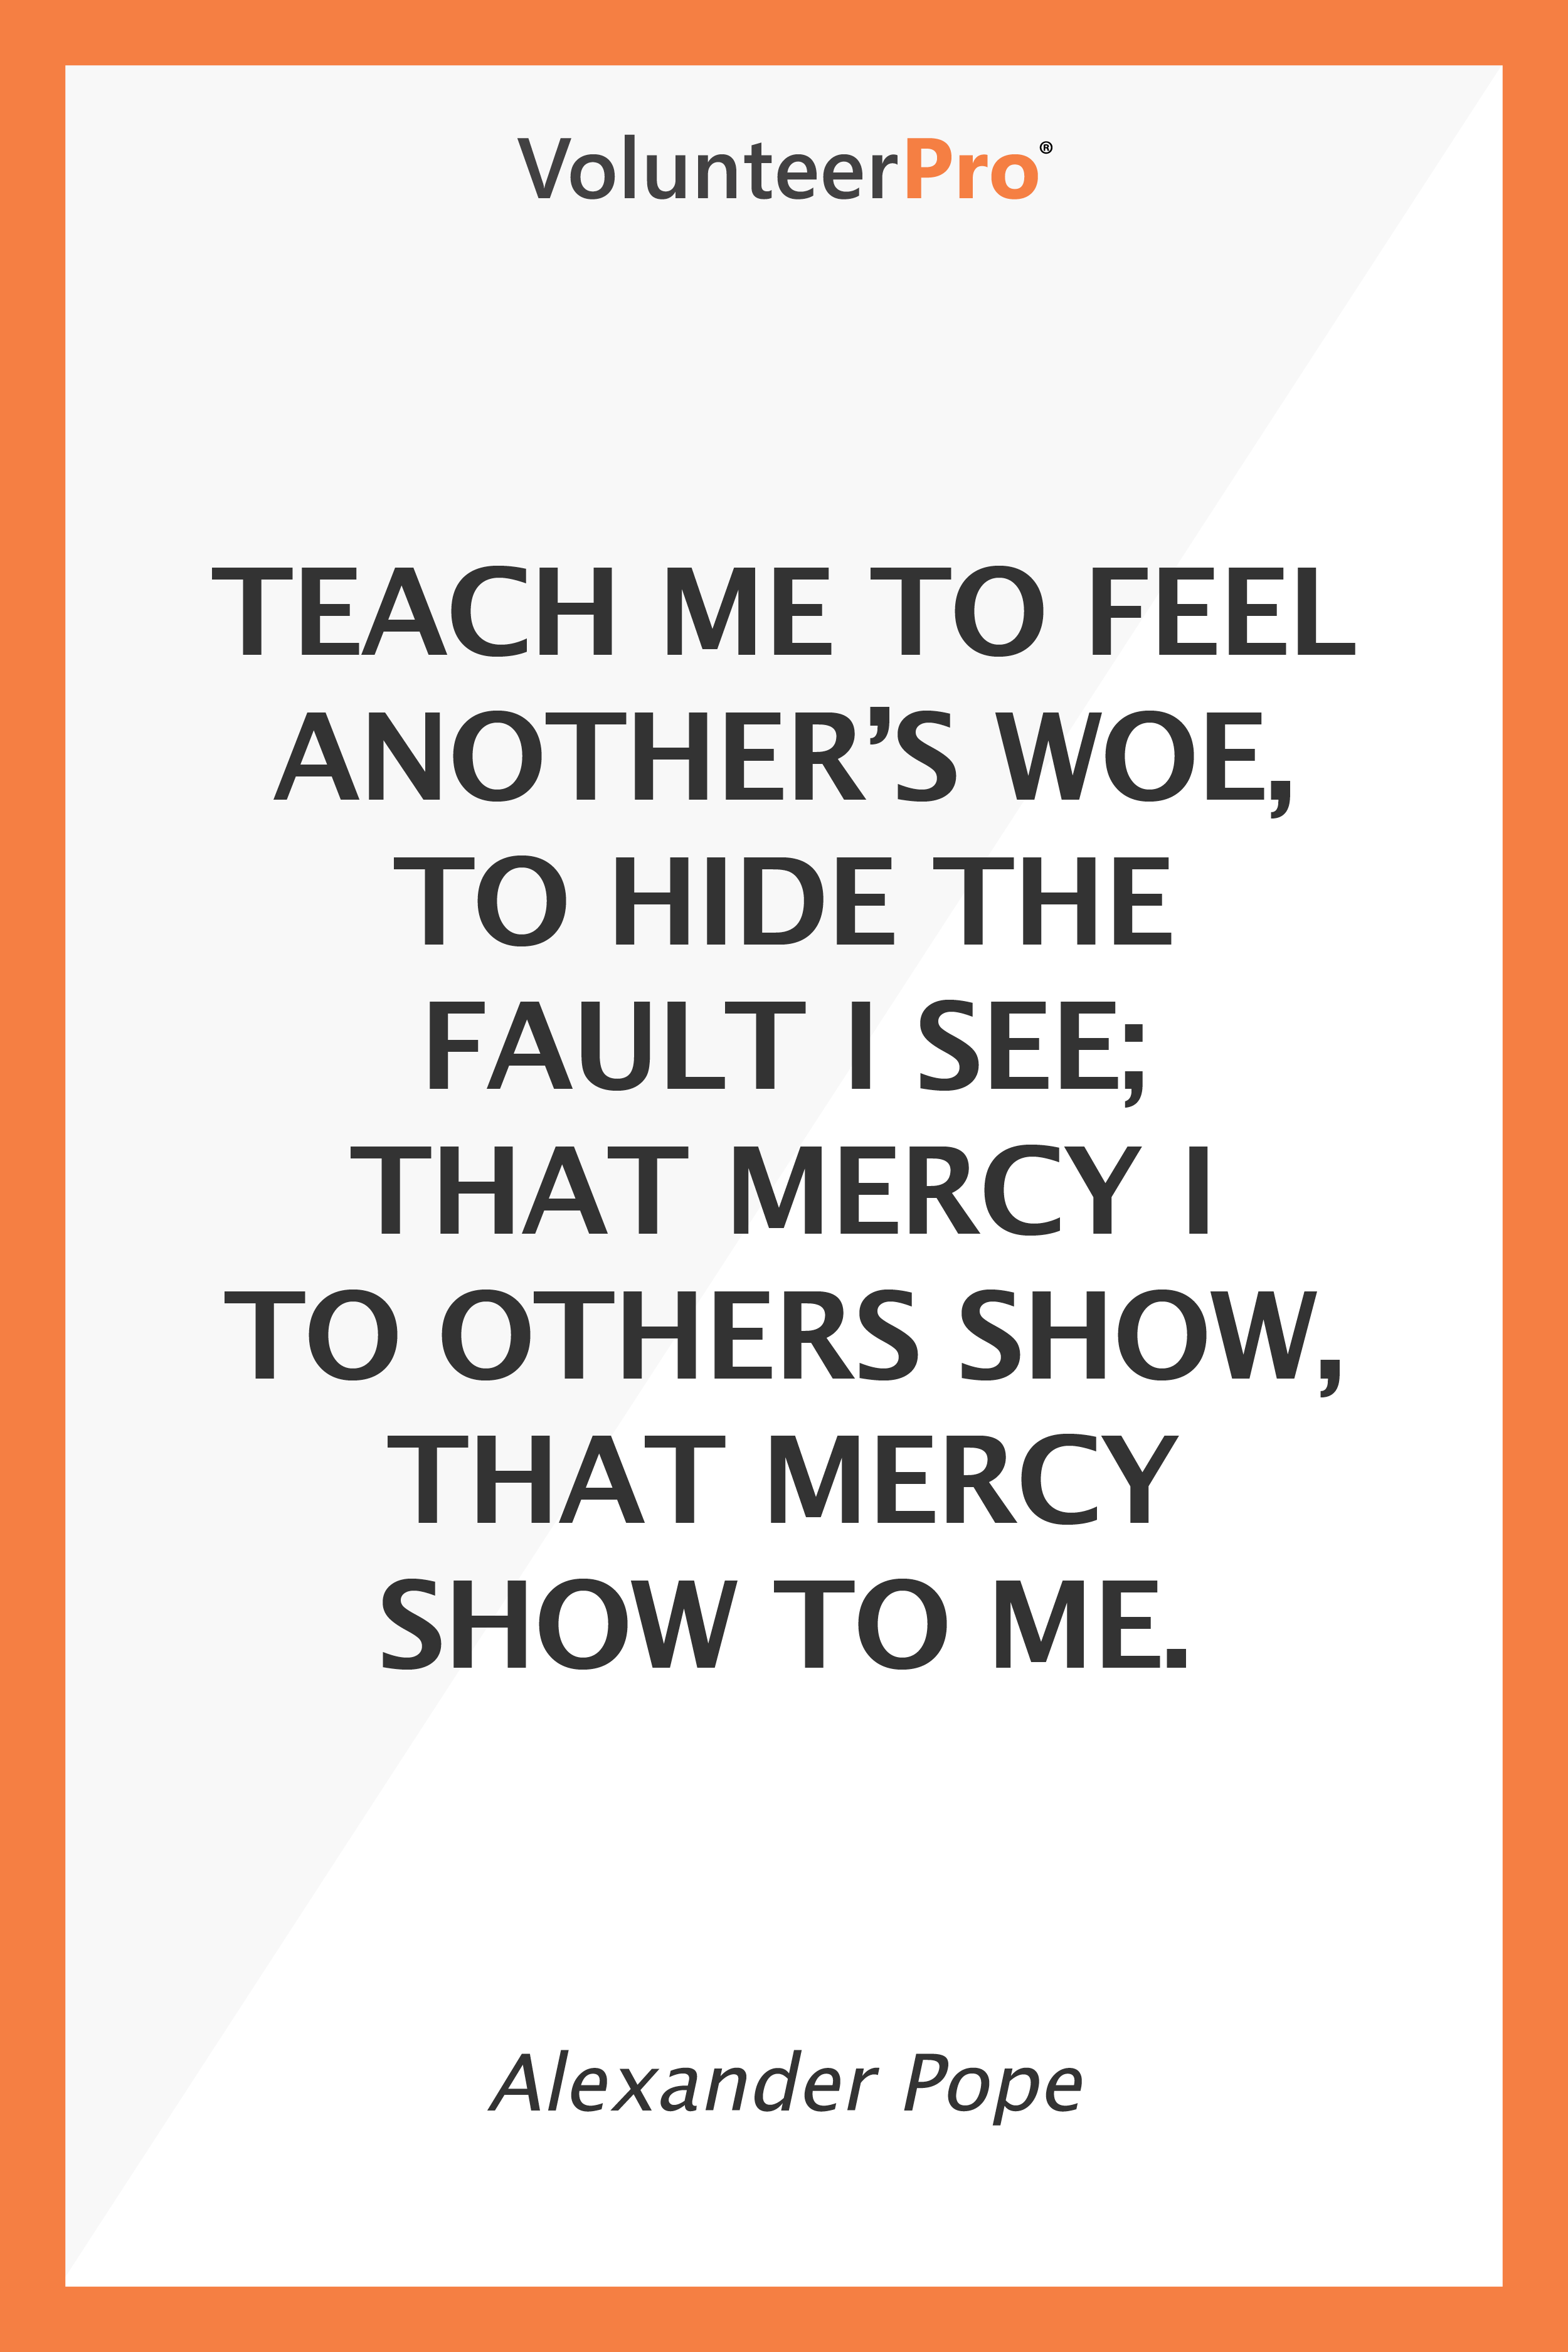 Alexander Pope - Teach me to feel another's woe, to hide